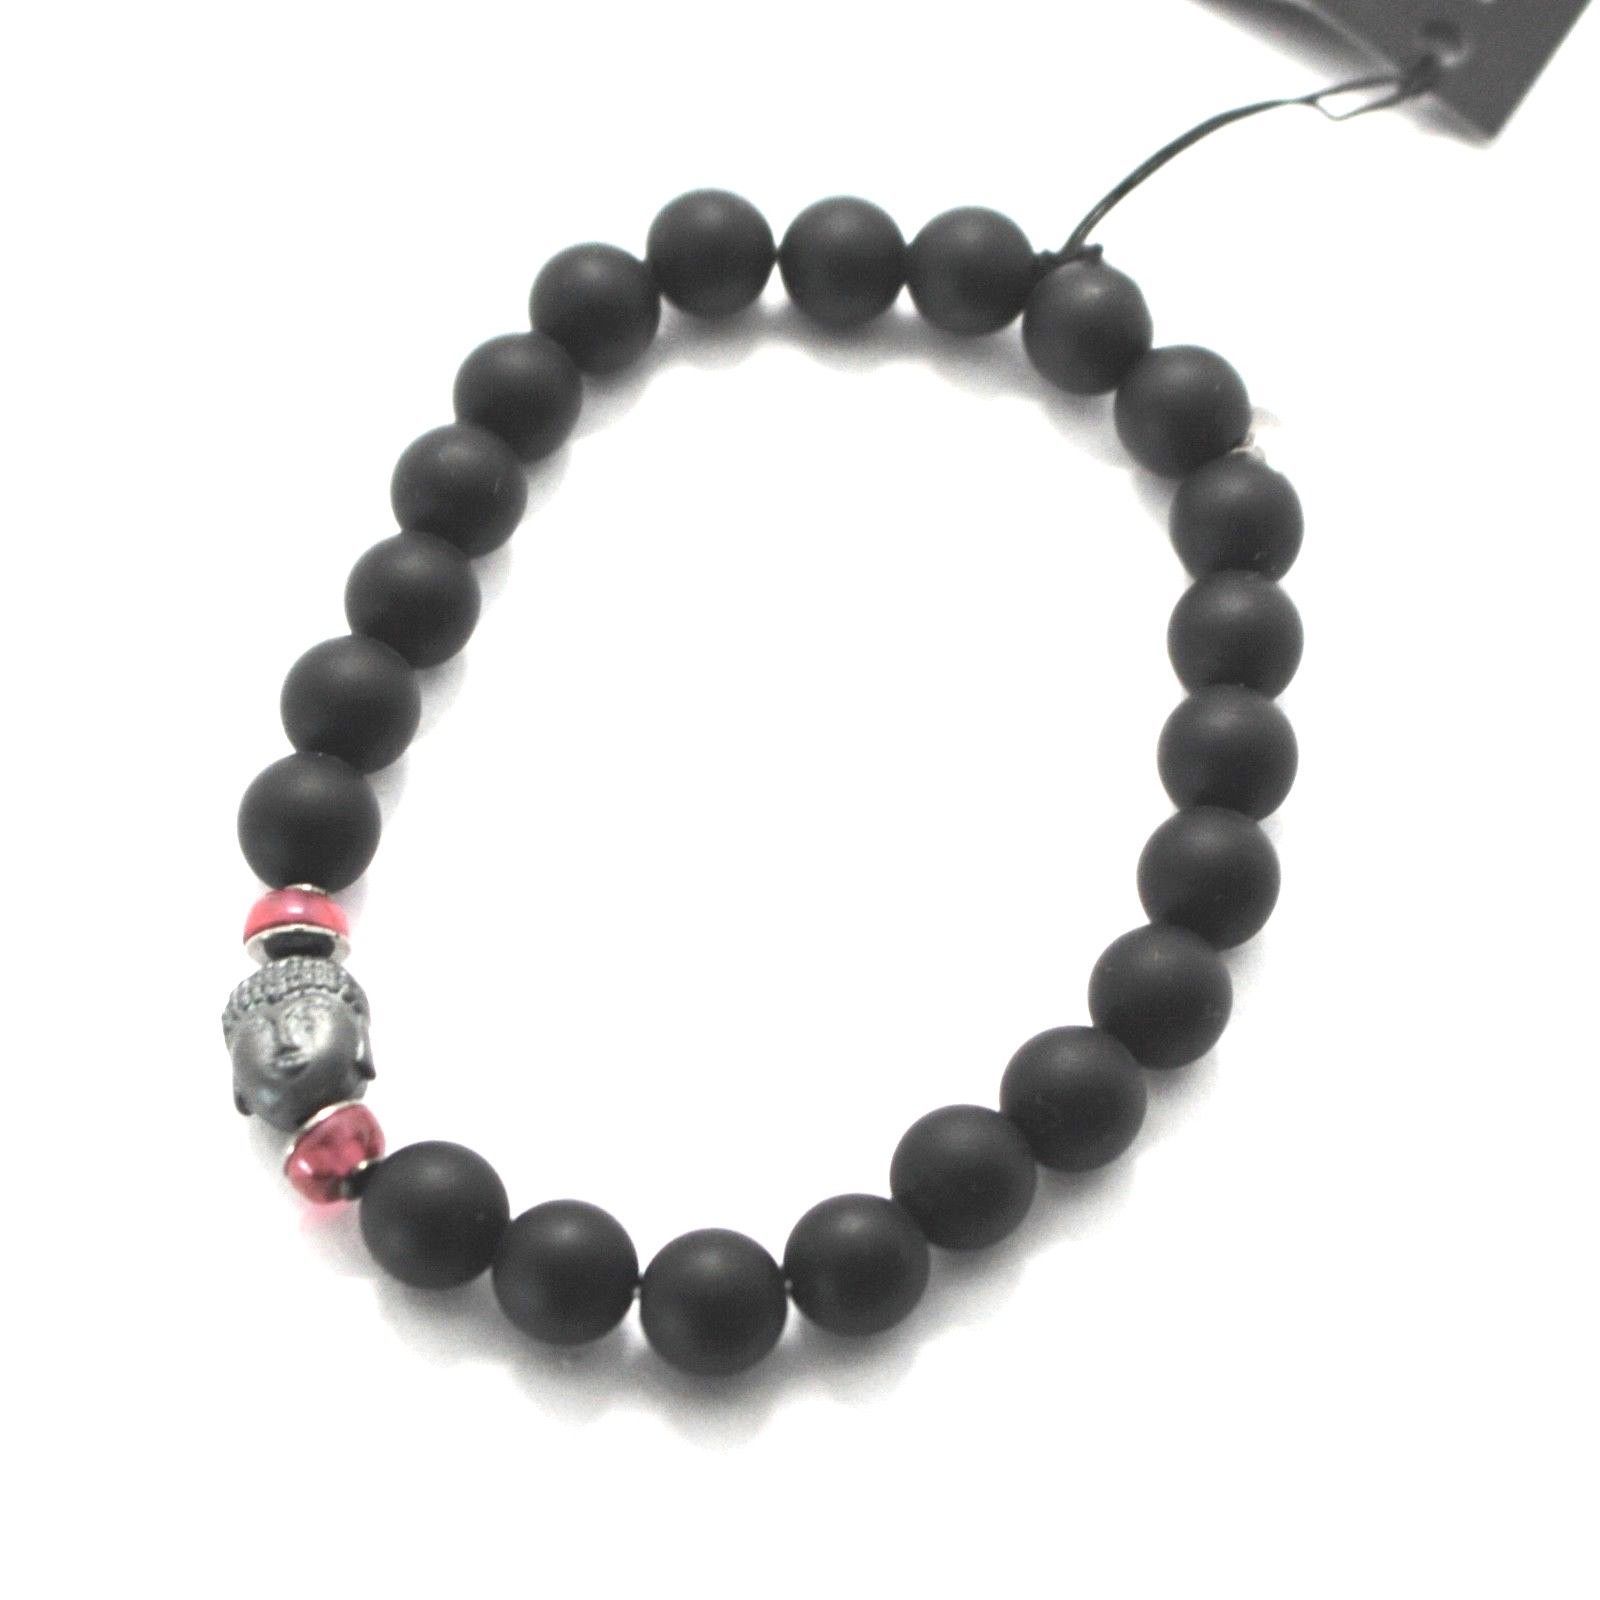 925 Silver Bracelet with Hematite and Onyx bpr-4 Made in Italy by whiff - $44.86